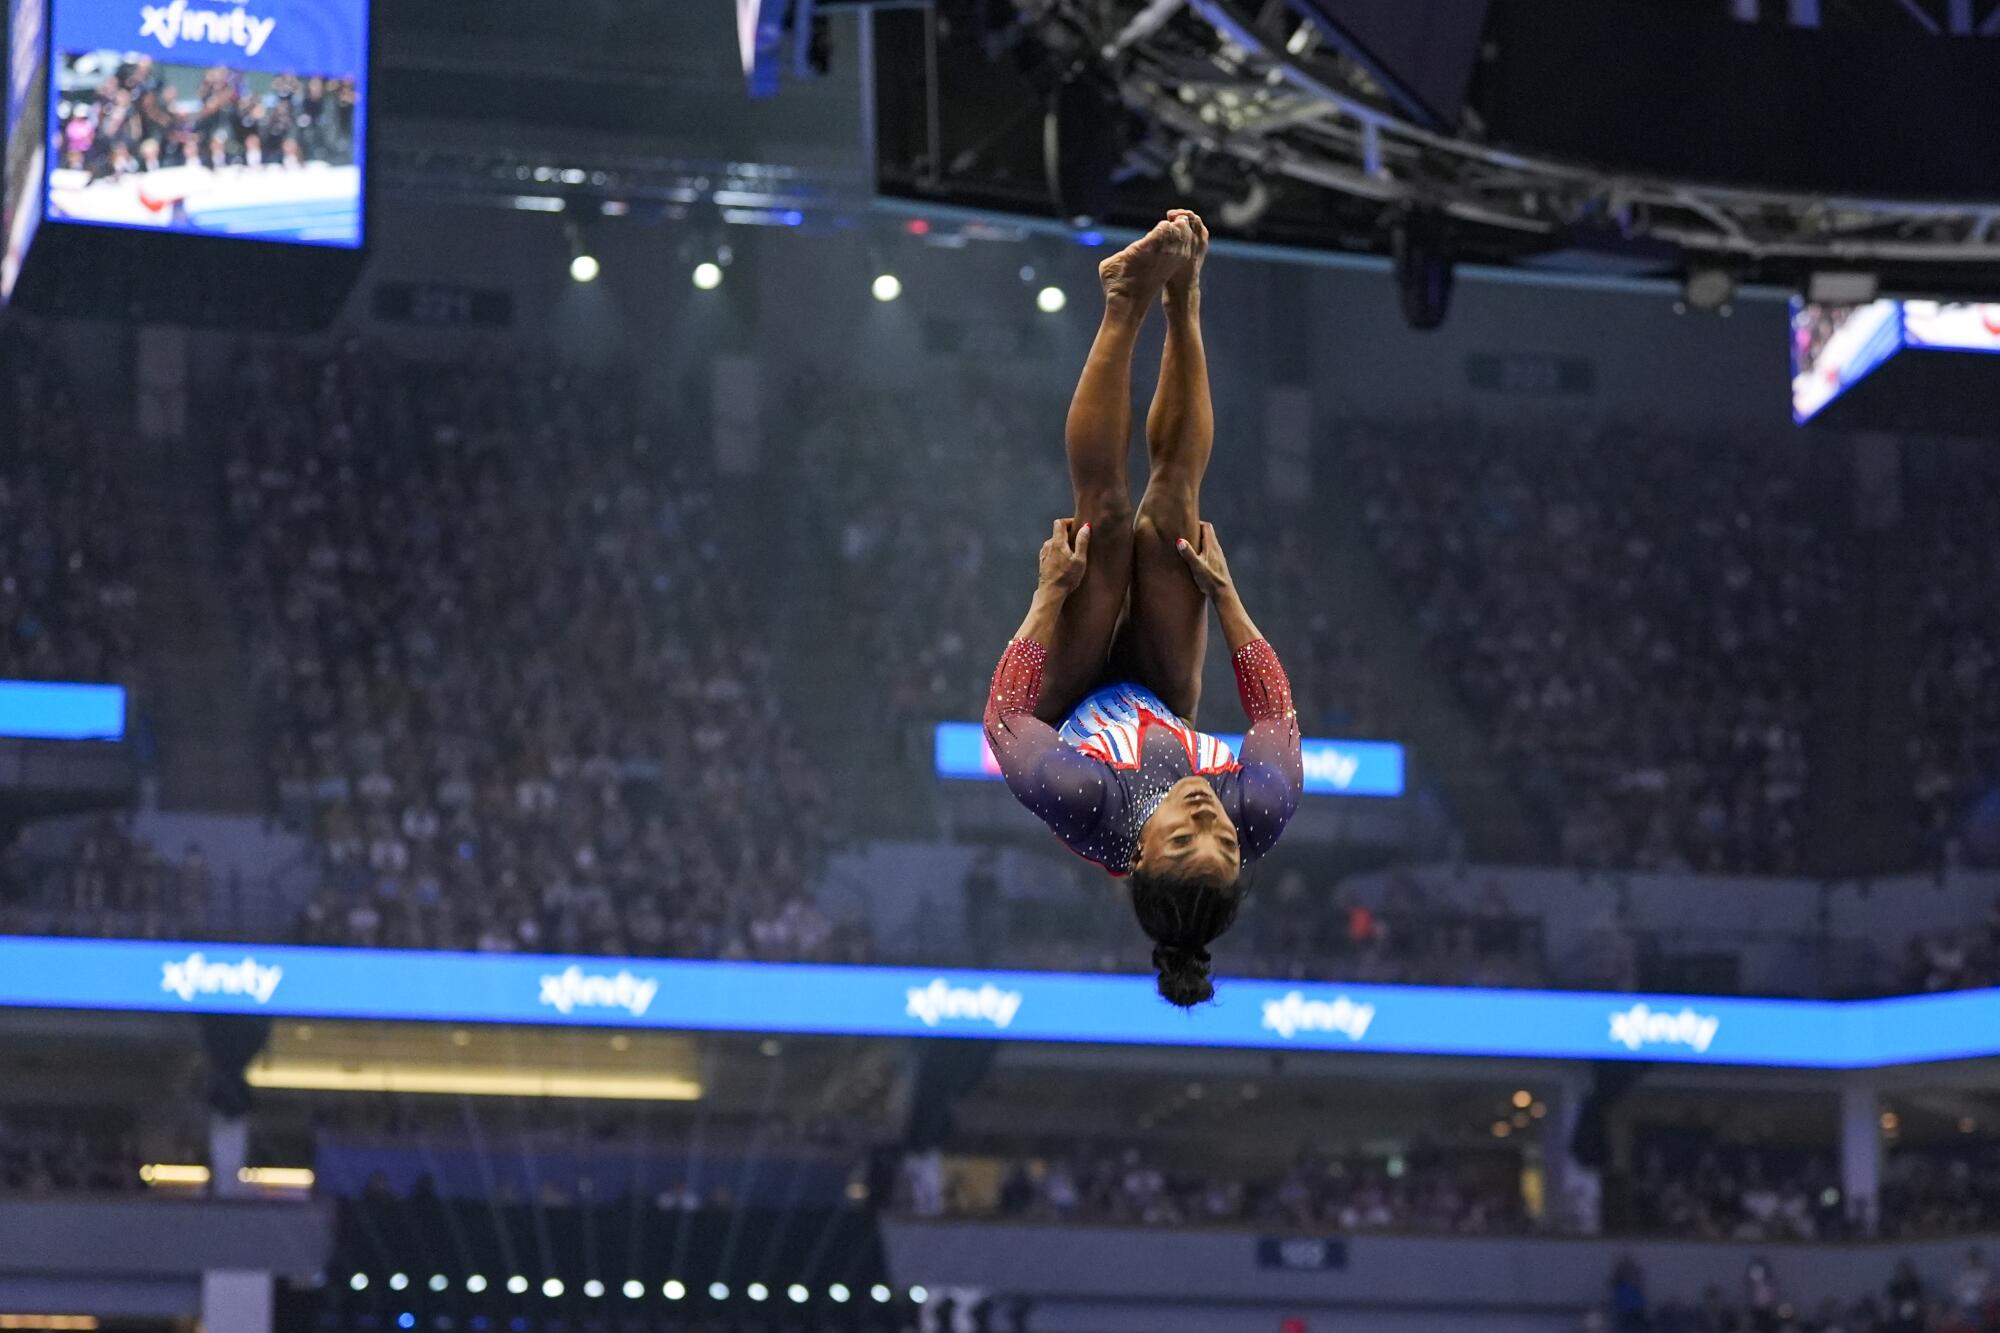 Simone Biles competes on the vault at the United States Gymnastics Olympic Trials.